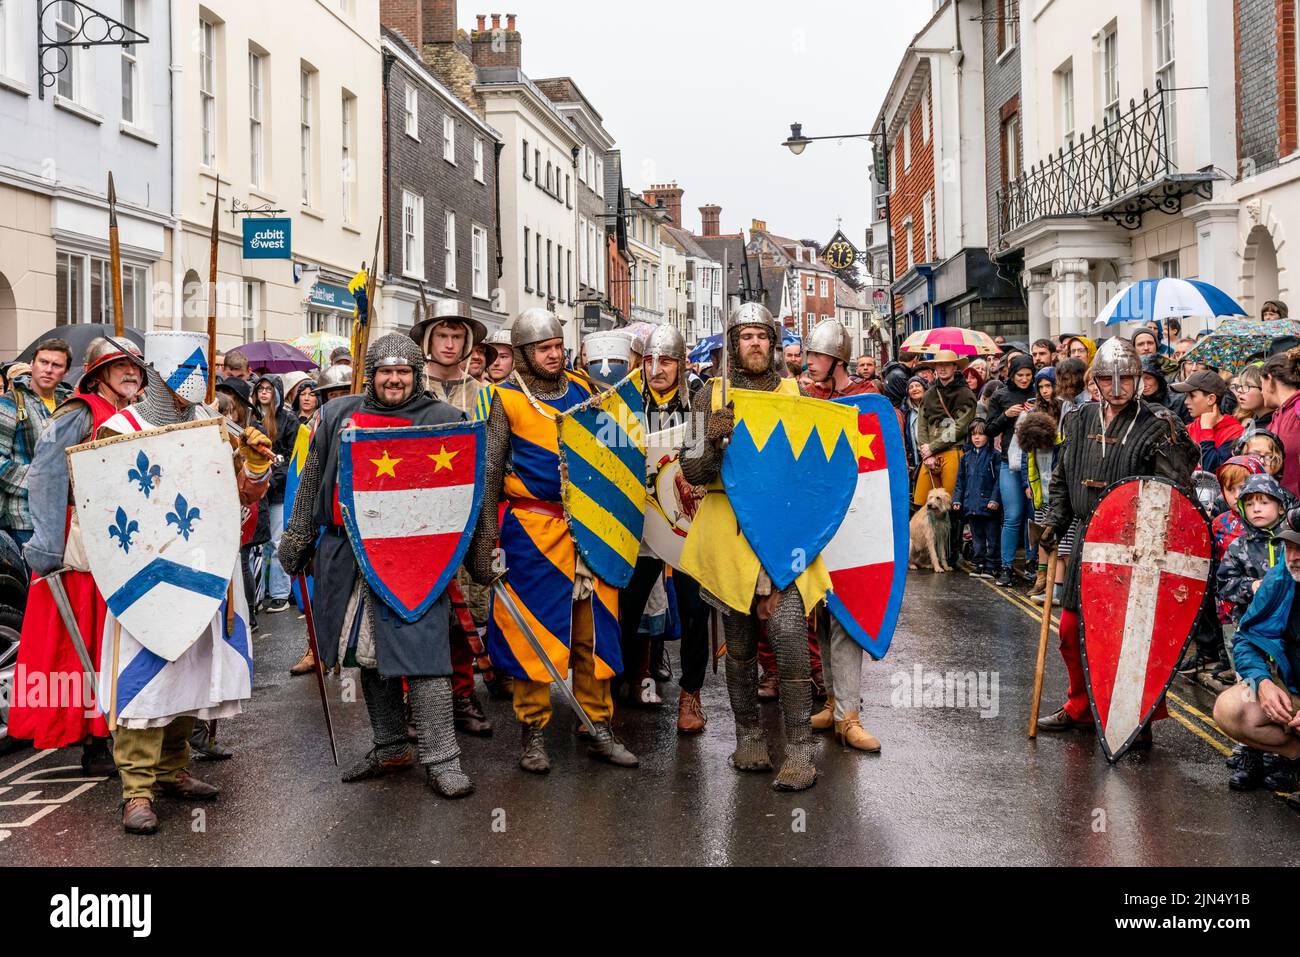 Men In Medieval Costume Prepare To Take Part In The Battle Of Lewes Re-Enactment Event, Lewes, East Sussex, UK Stock Photo